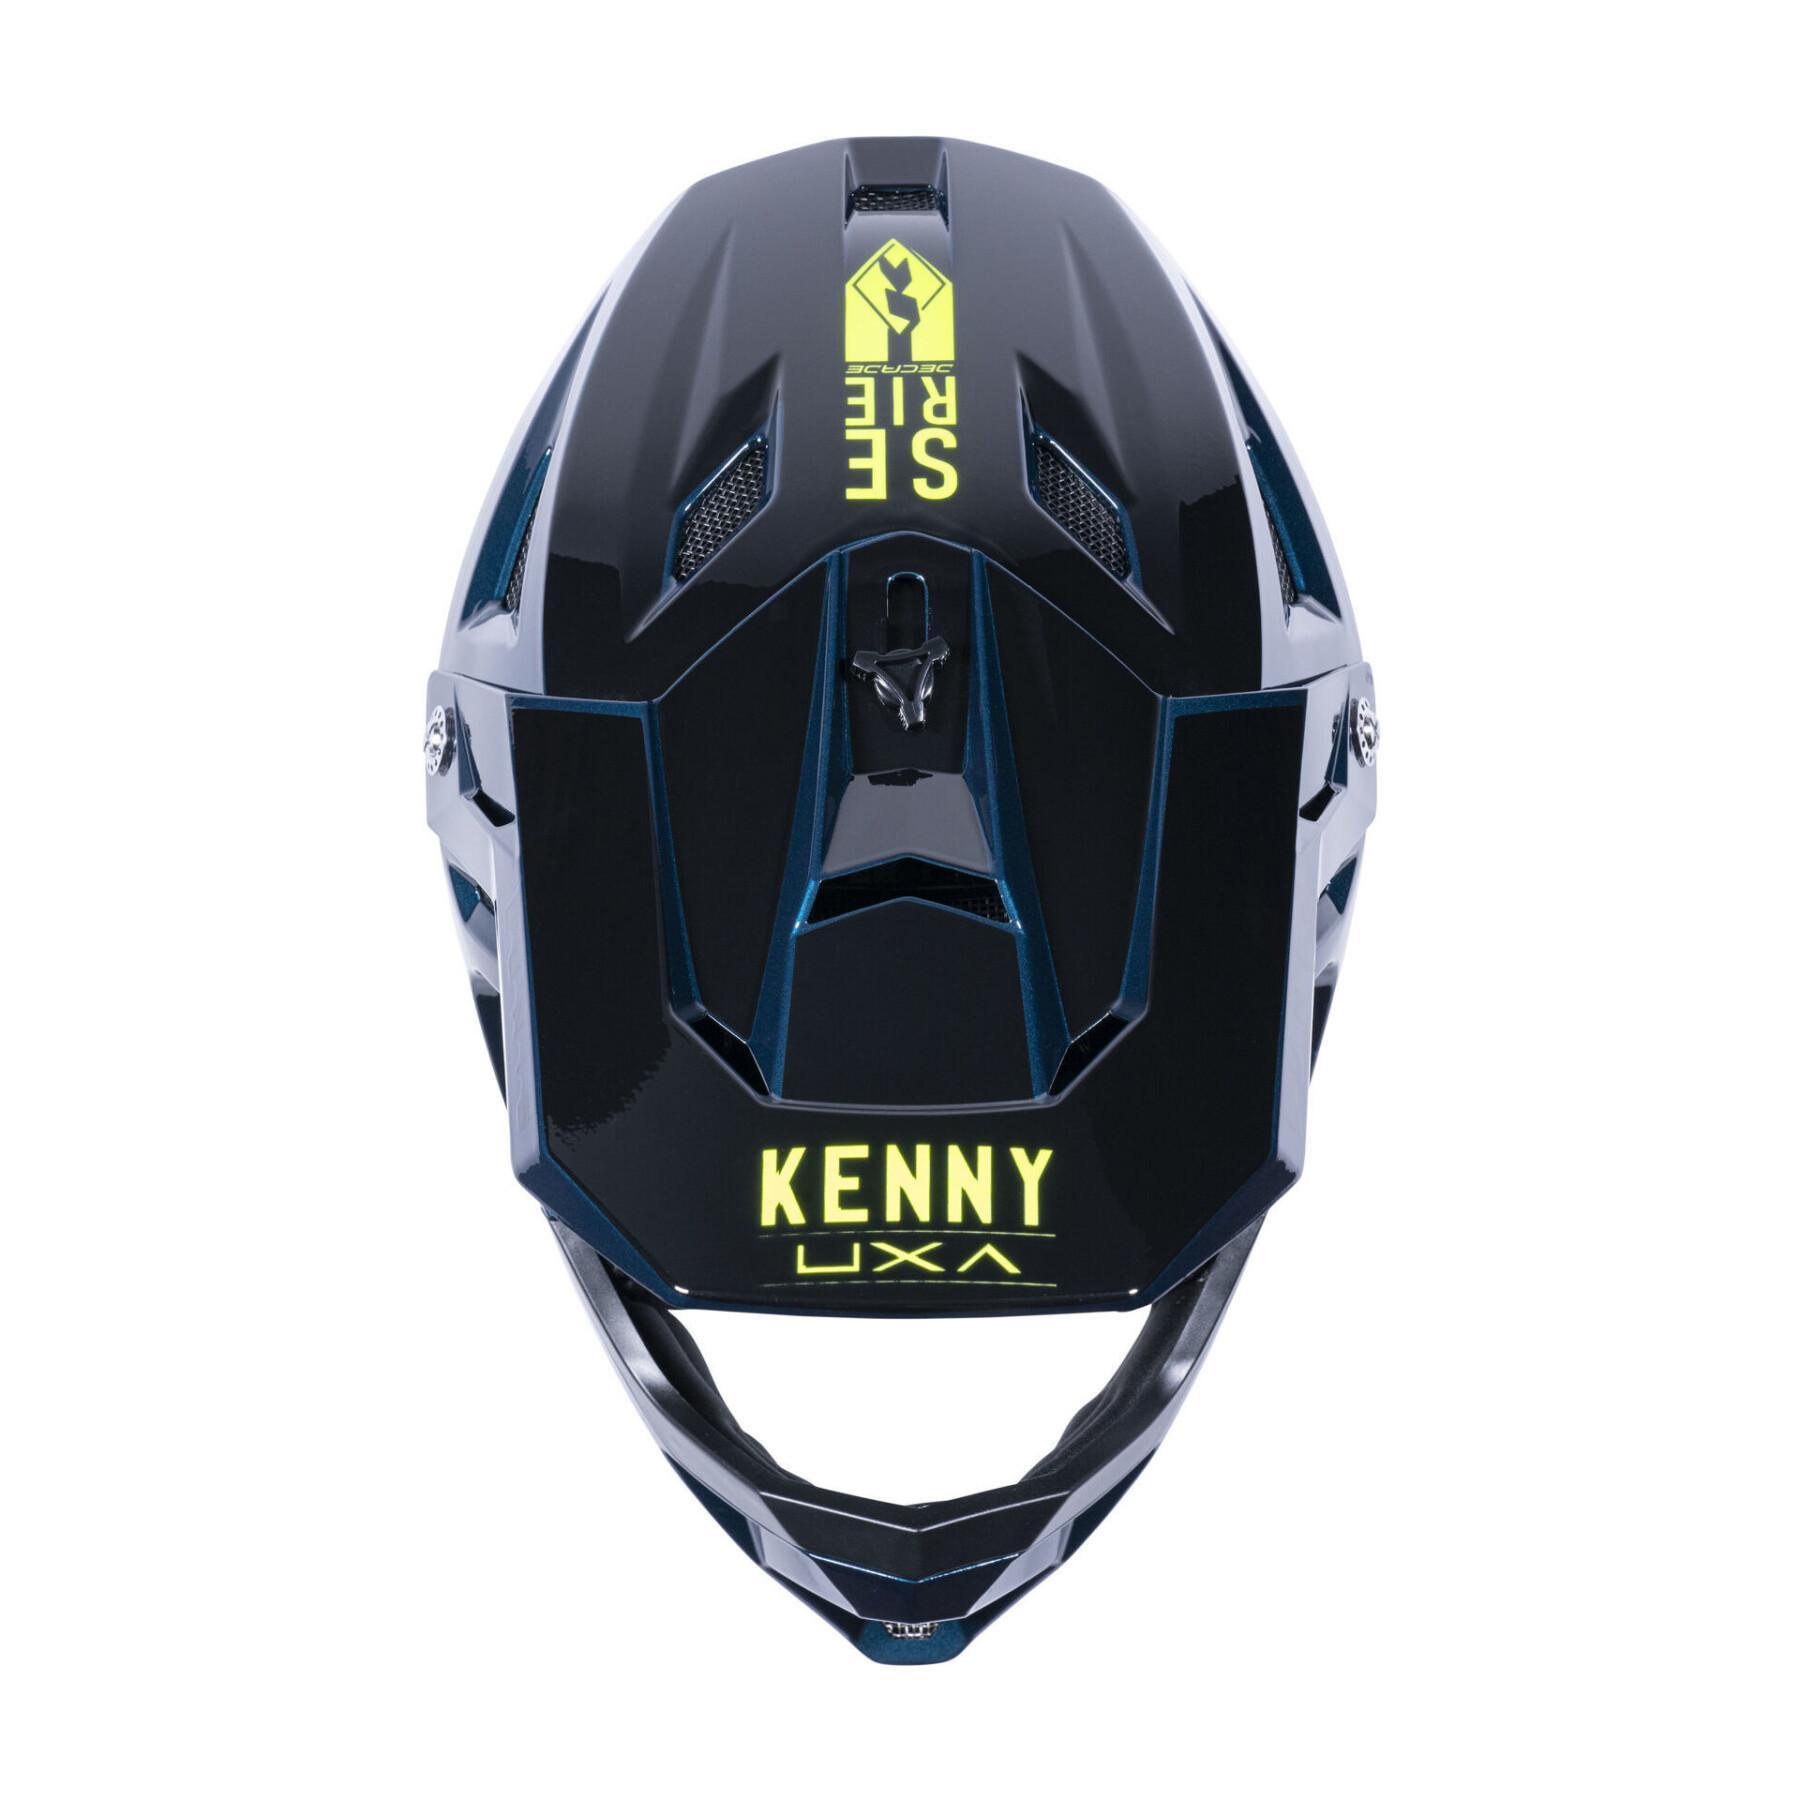 Headset Kenny Decade Graphic